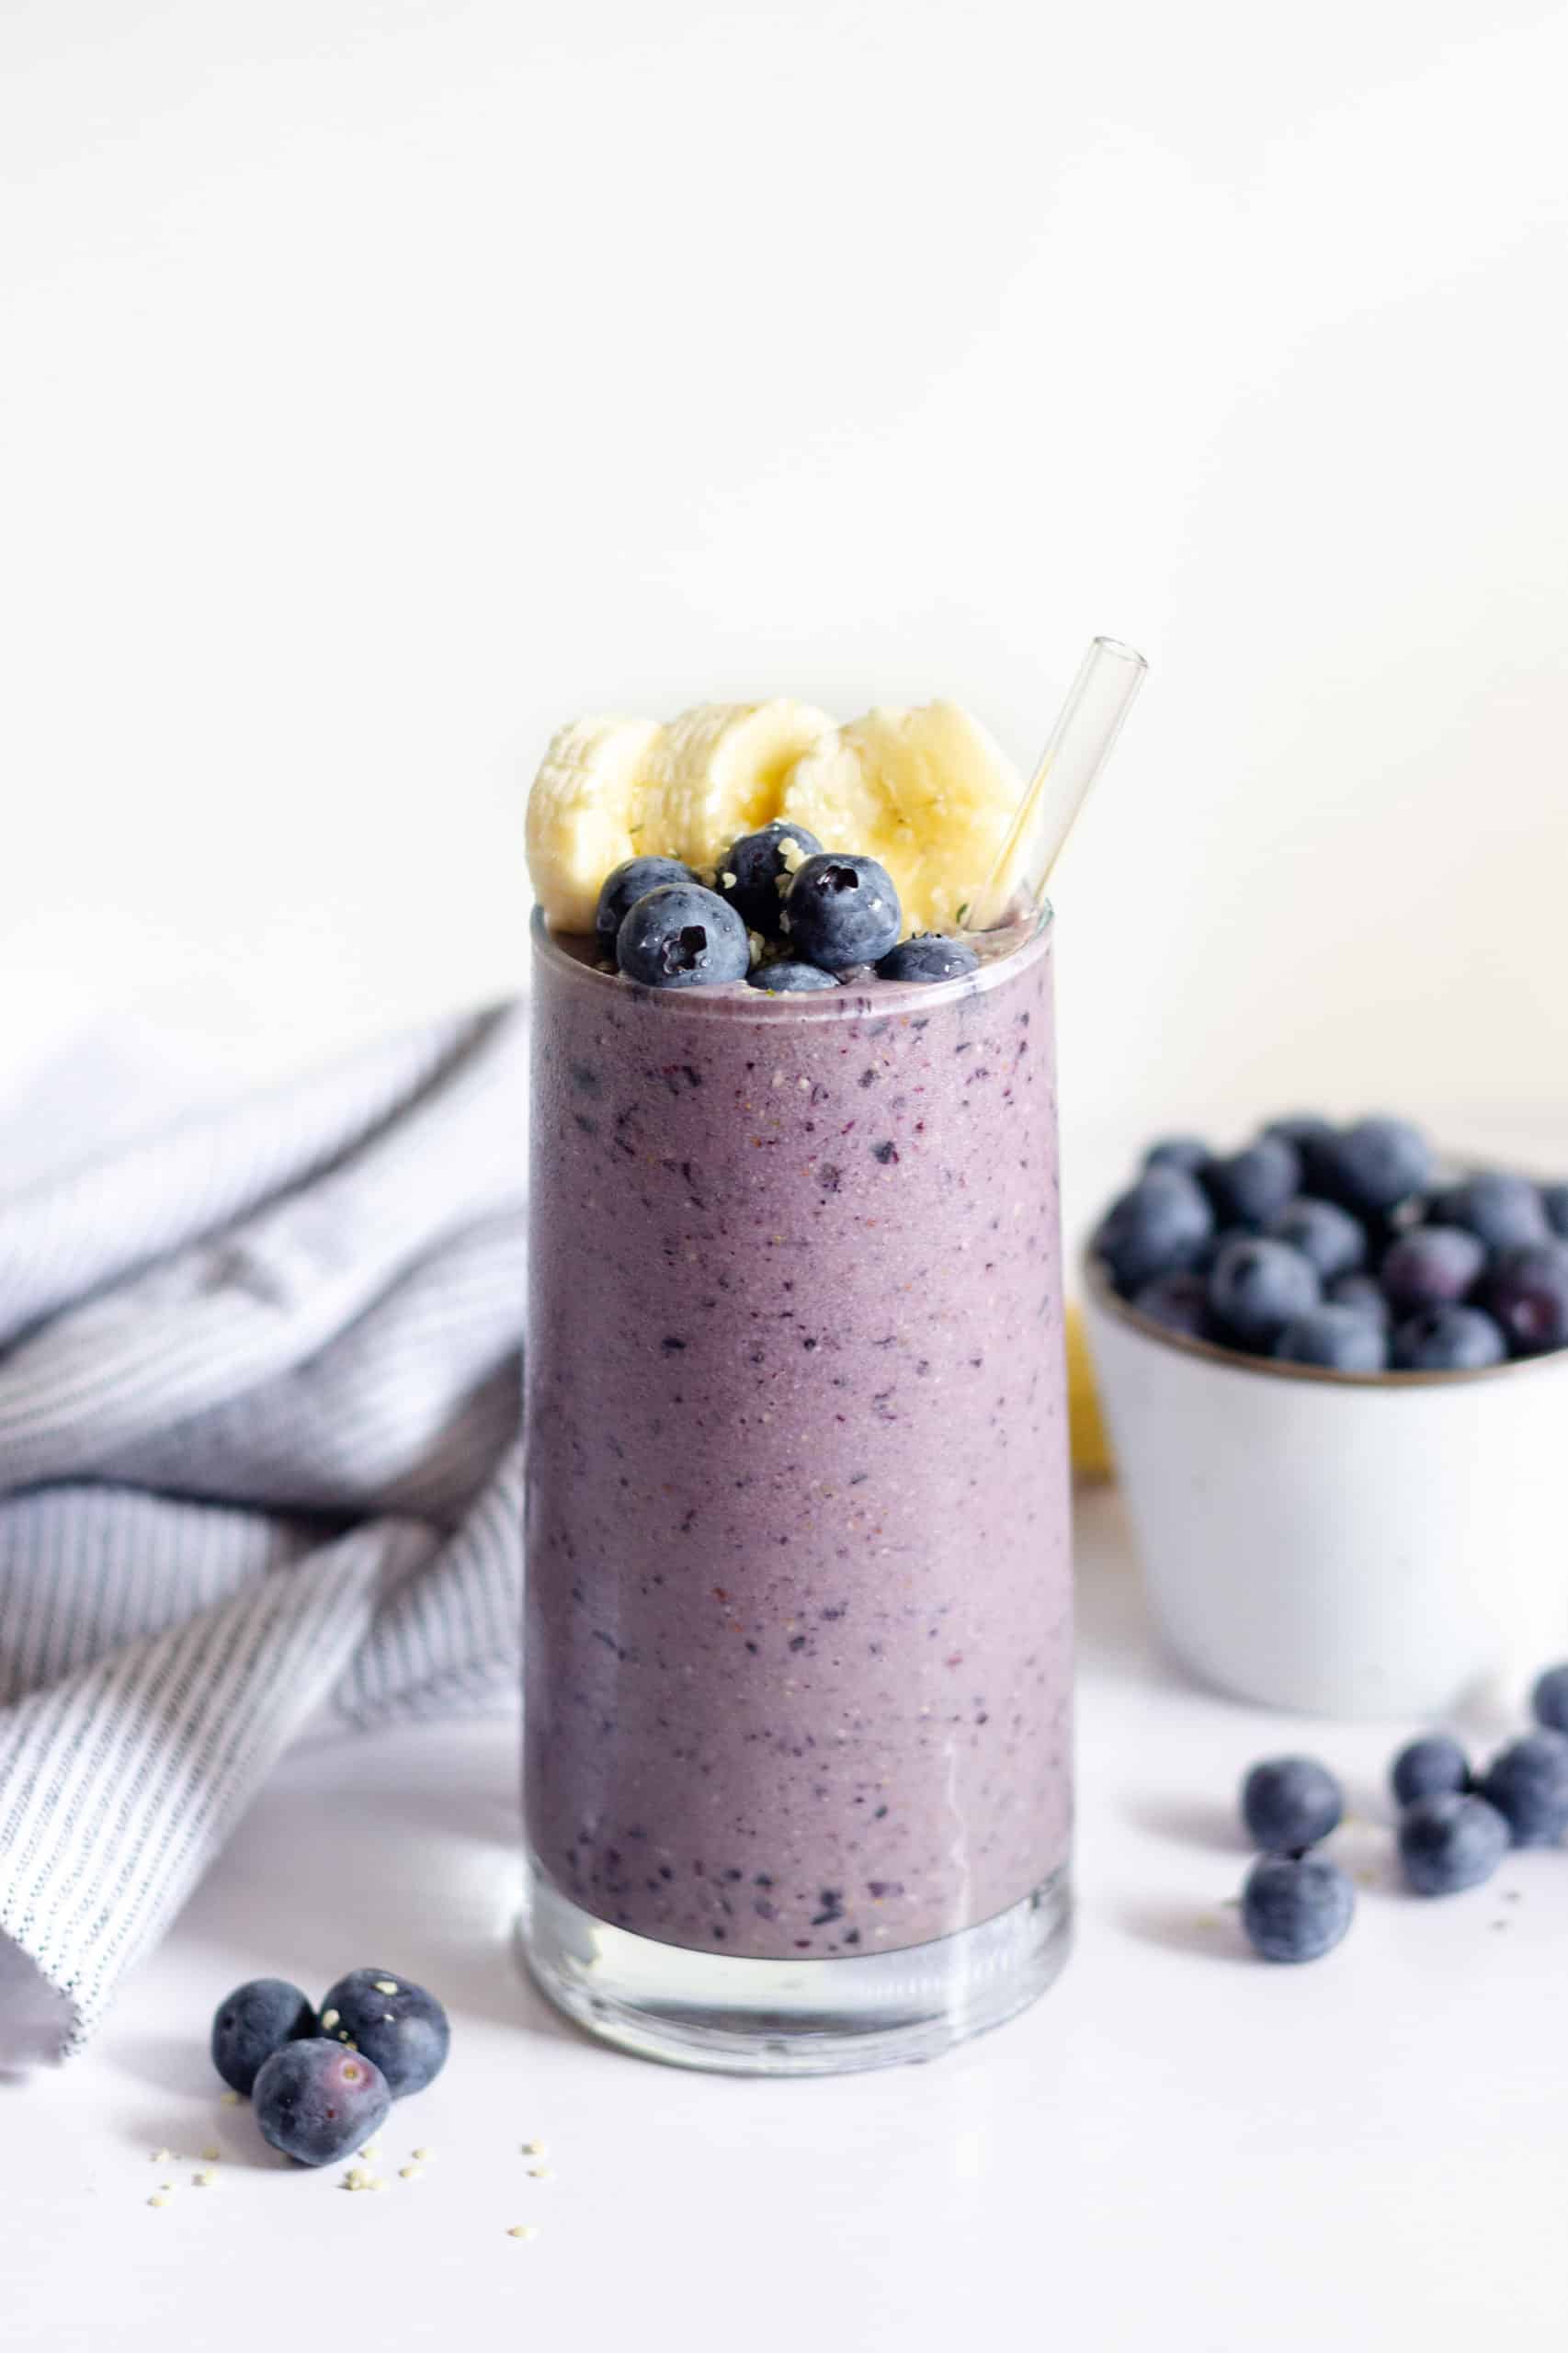 Healthy Blueberry Banana Smoothie